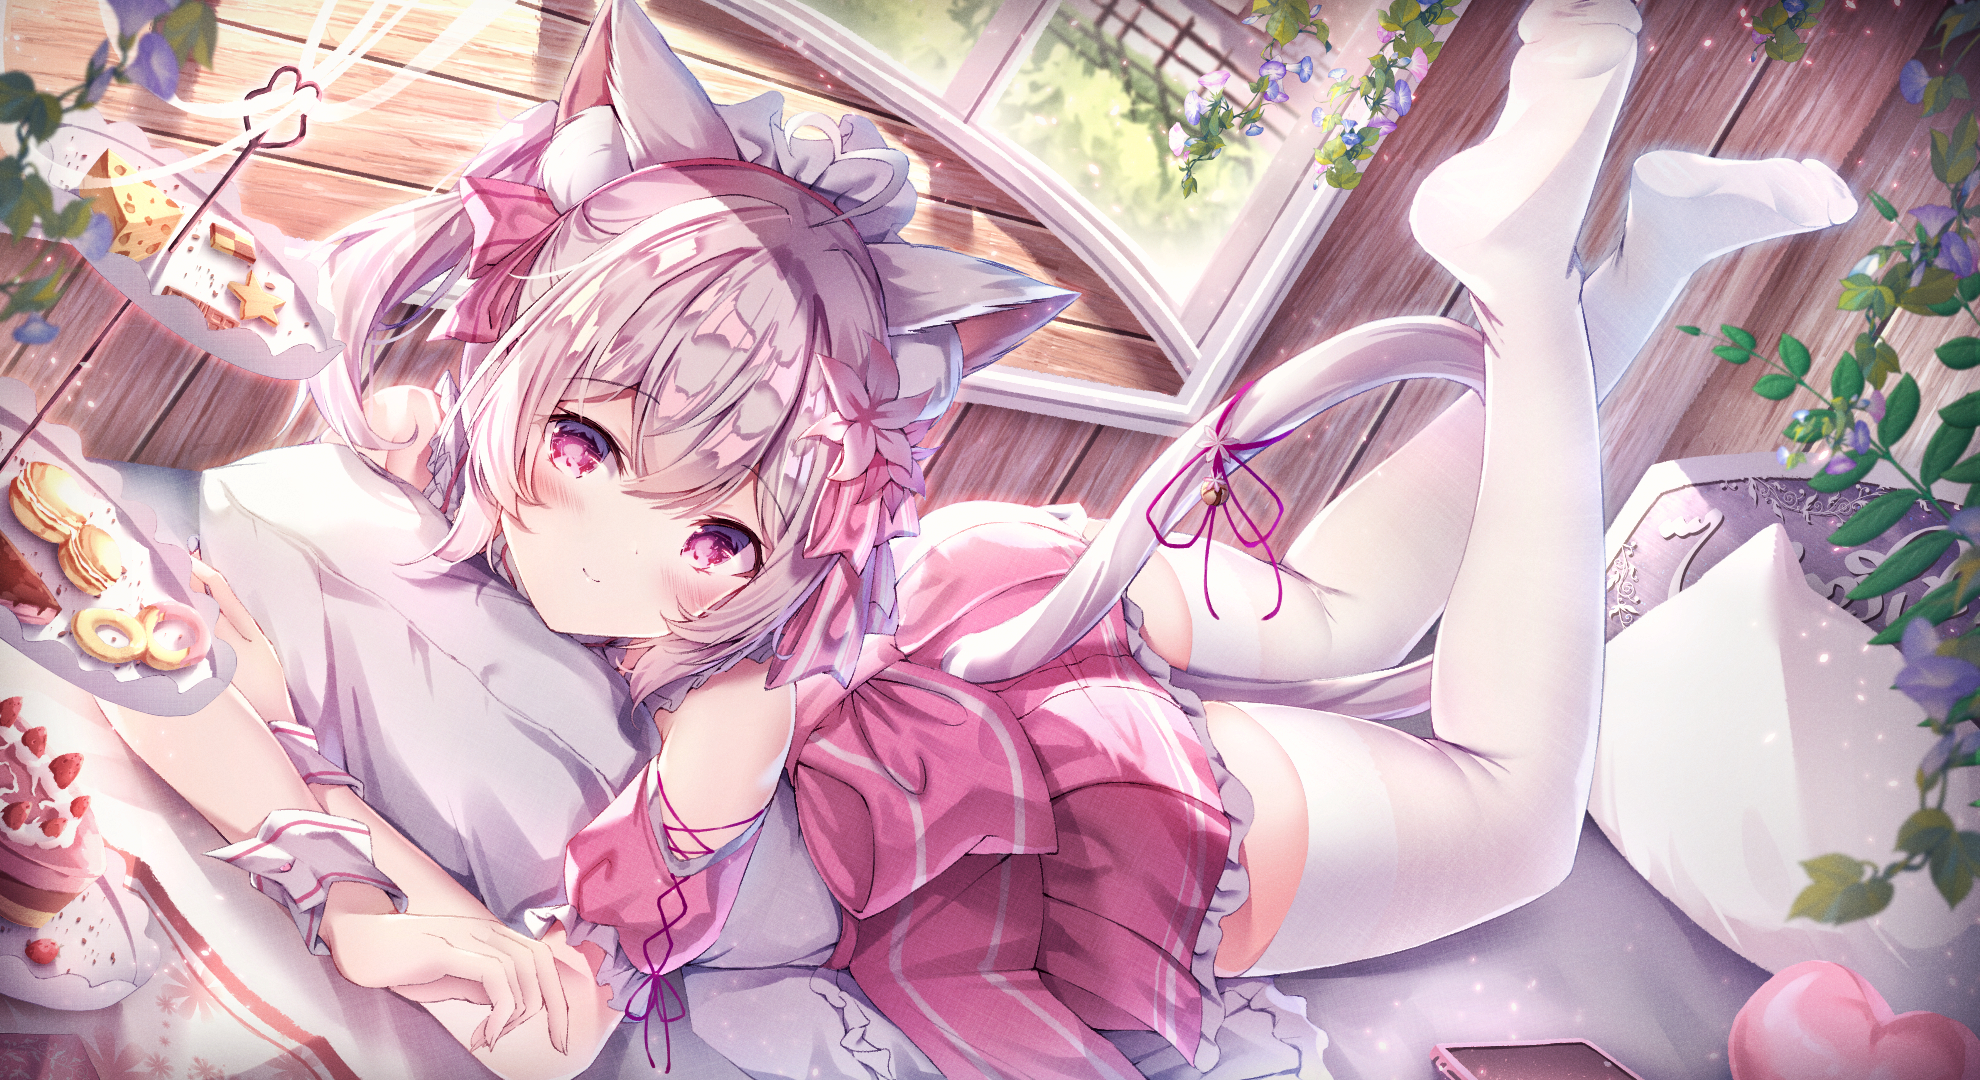 Anime 1980x1080 anime anime girls cat girl cat tail tail stockings white stockings sweets lying on front